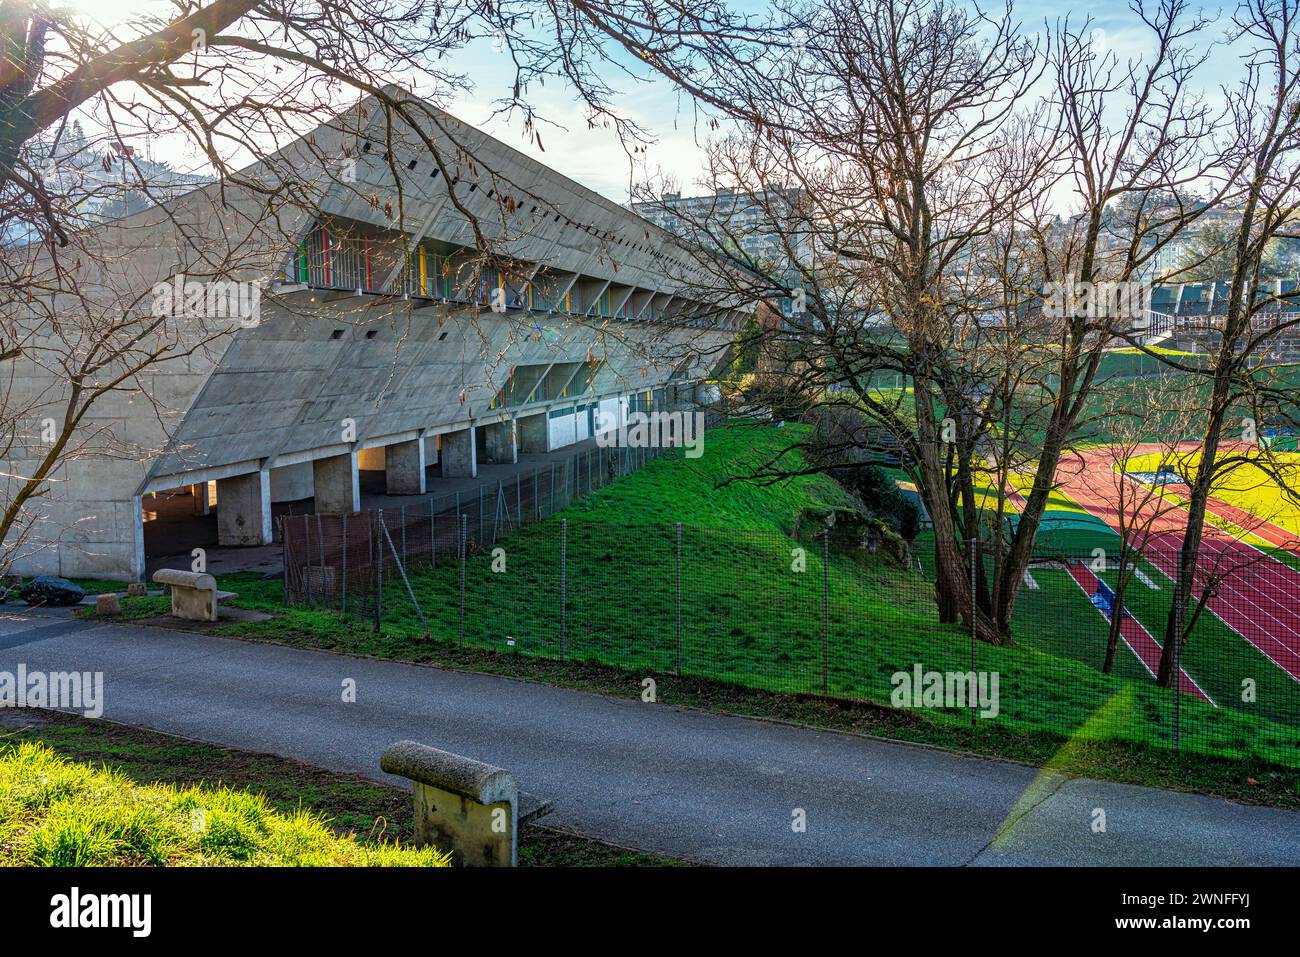 The Maison de la Culture of Firminy, by architect Le Corbusier, has become part of the international network of sites recognized by the UN. Firminy Stock Photo